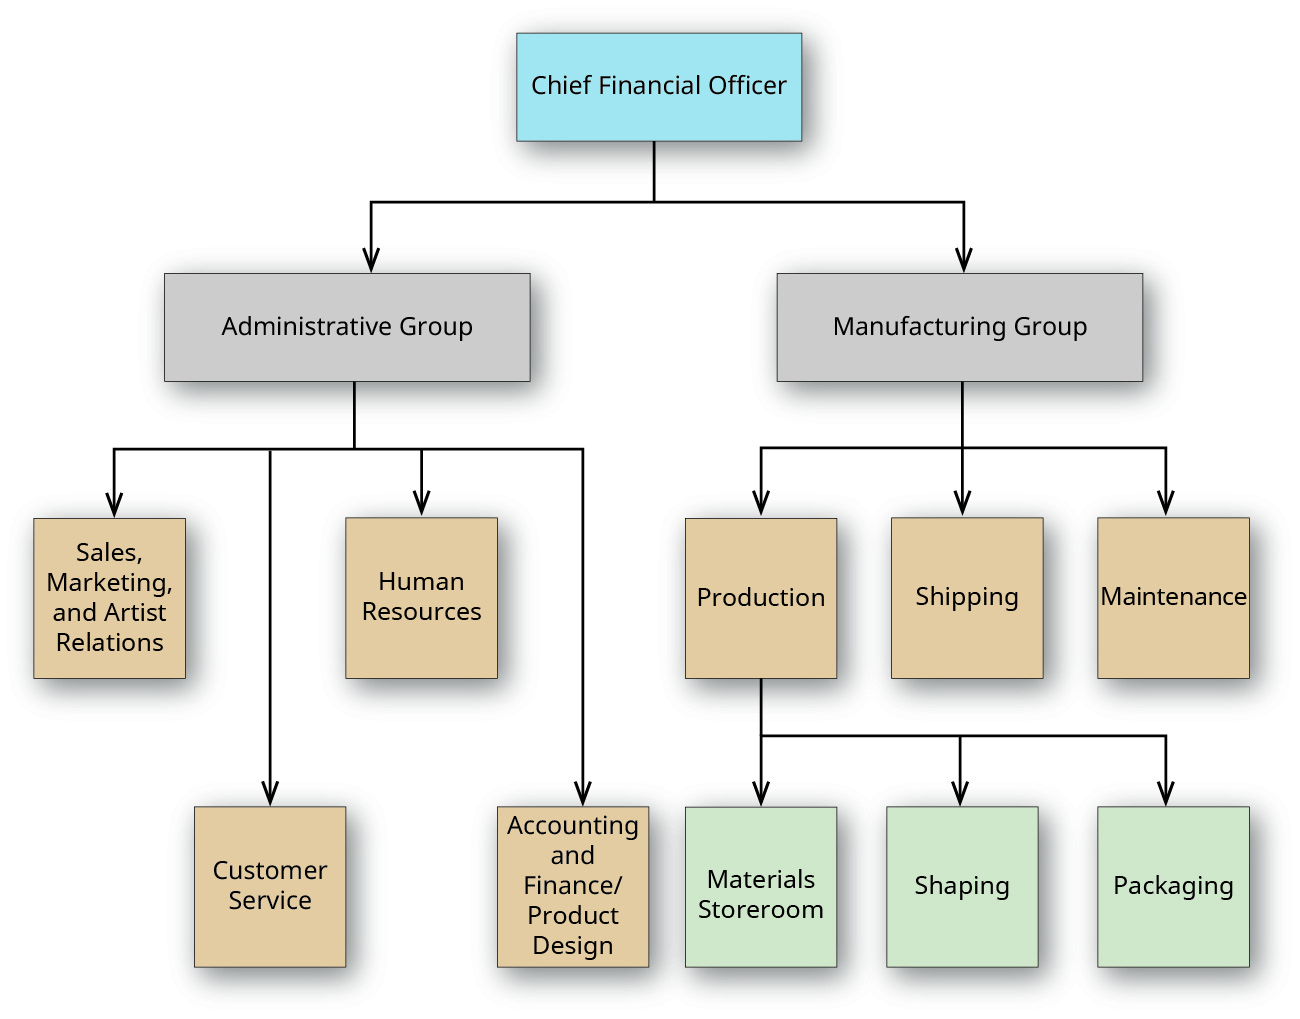 Box labeled Chief Financial Officer at the top points to two boxes just below labeled Administrative Group and Manufacturing Group. The Administrative Group box points to four boxes below that: Sales, Marketing, and Artist Relations; Customer Service; Human Resources; and Accounting and Finance/Product Design. The Manufacturing Group box points to three boxes below it: Production, Shipping, and Maintenance. The Production box points to three boxes below it: Materials Storeroom, Shaping, and Packaging.